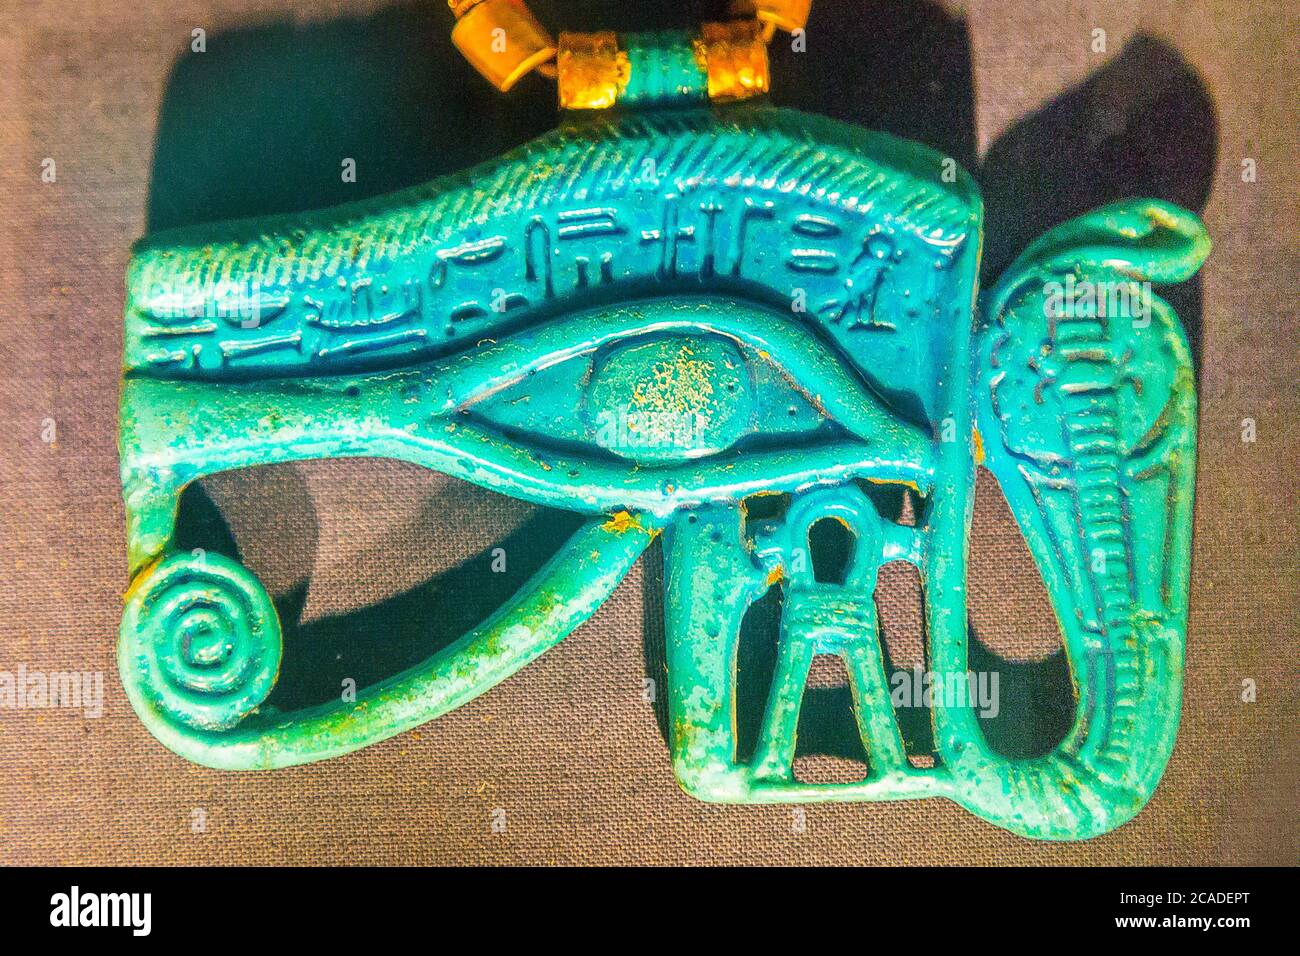 Egypt, Cairo, Tutankhamon jewellery, from his tomb in Luxor : A blue faience pectoral in the shape of an Udjat eye. Stock Photo